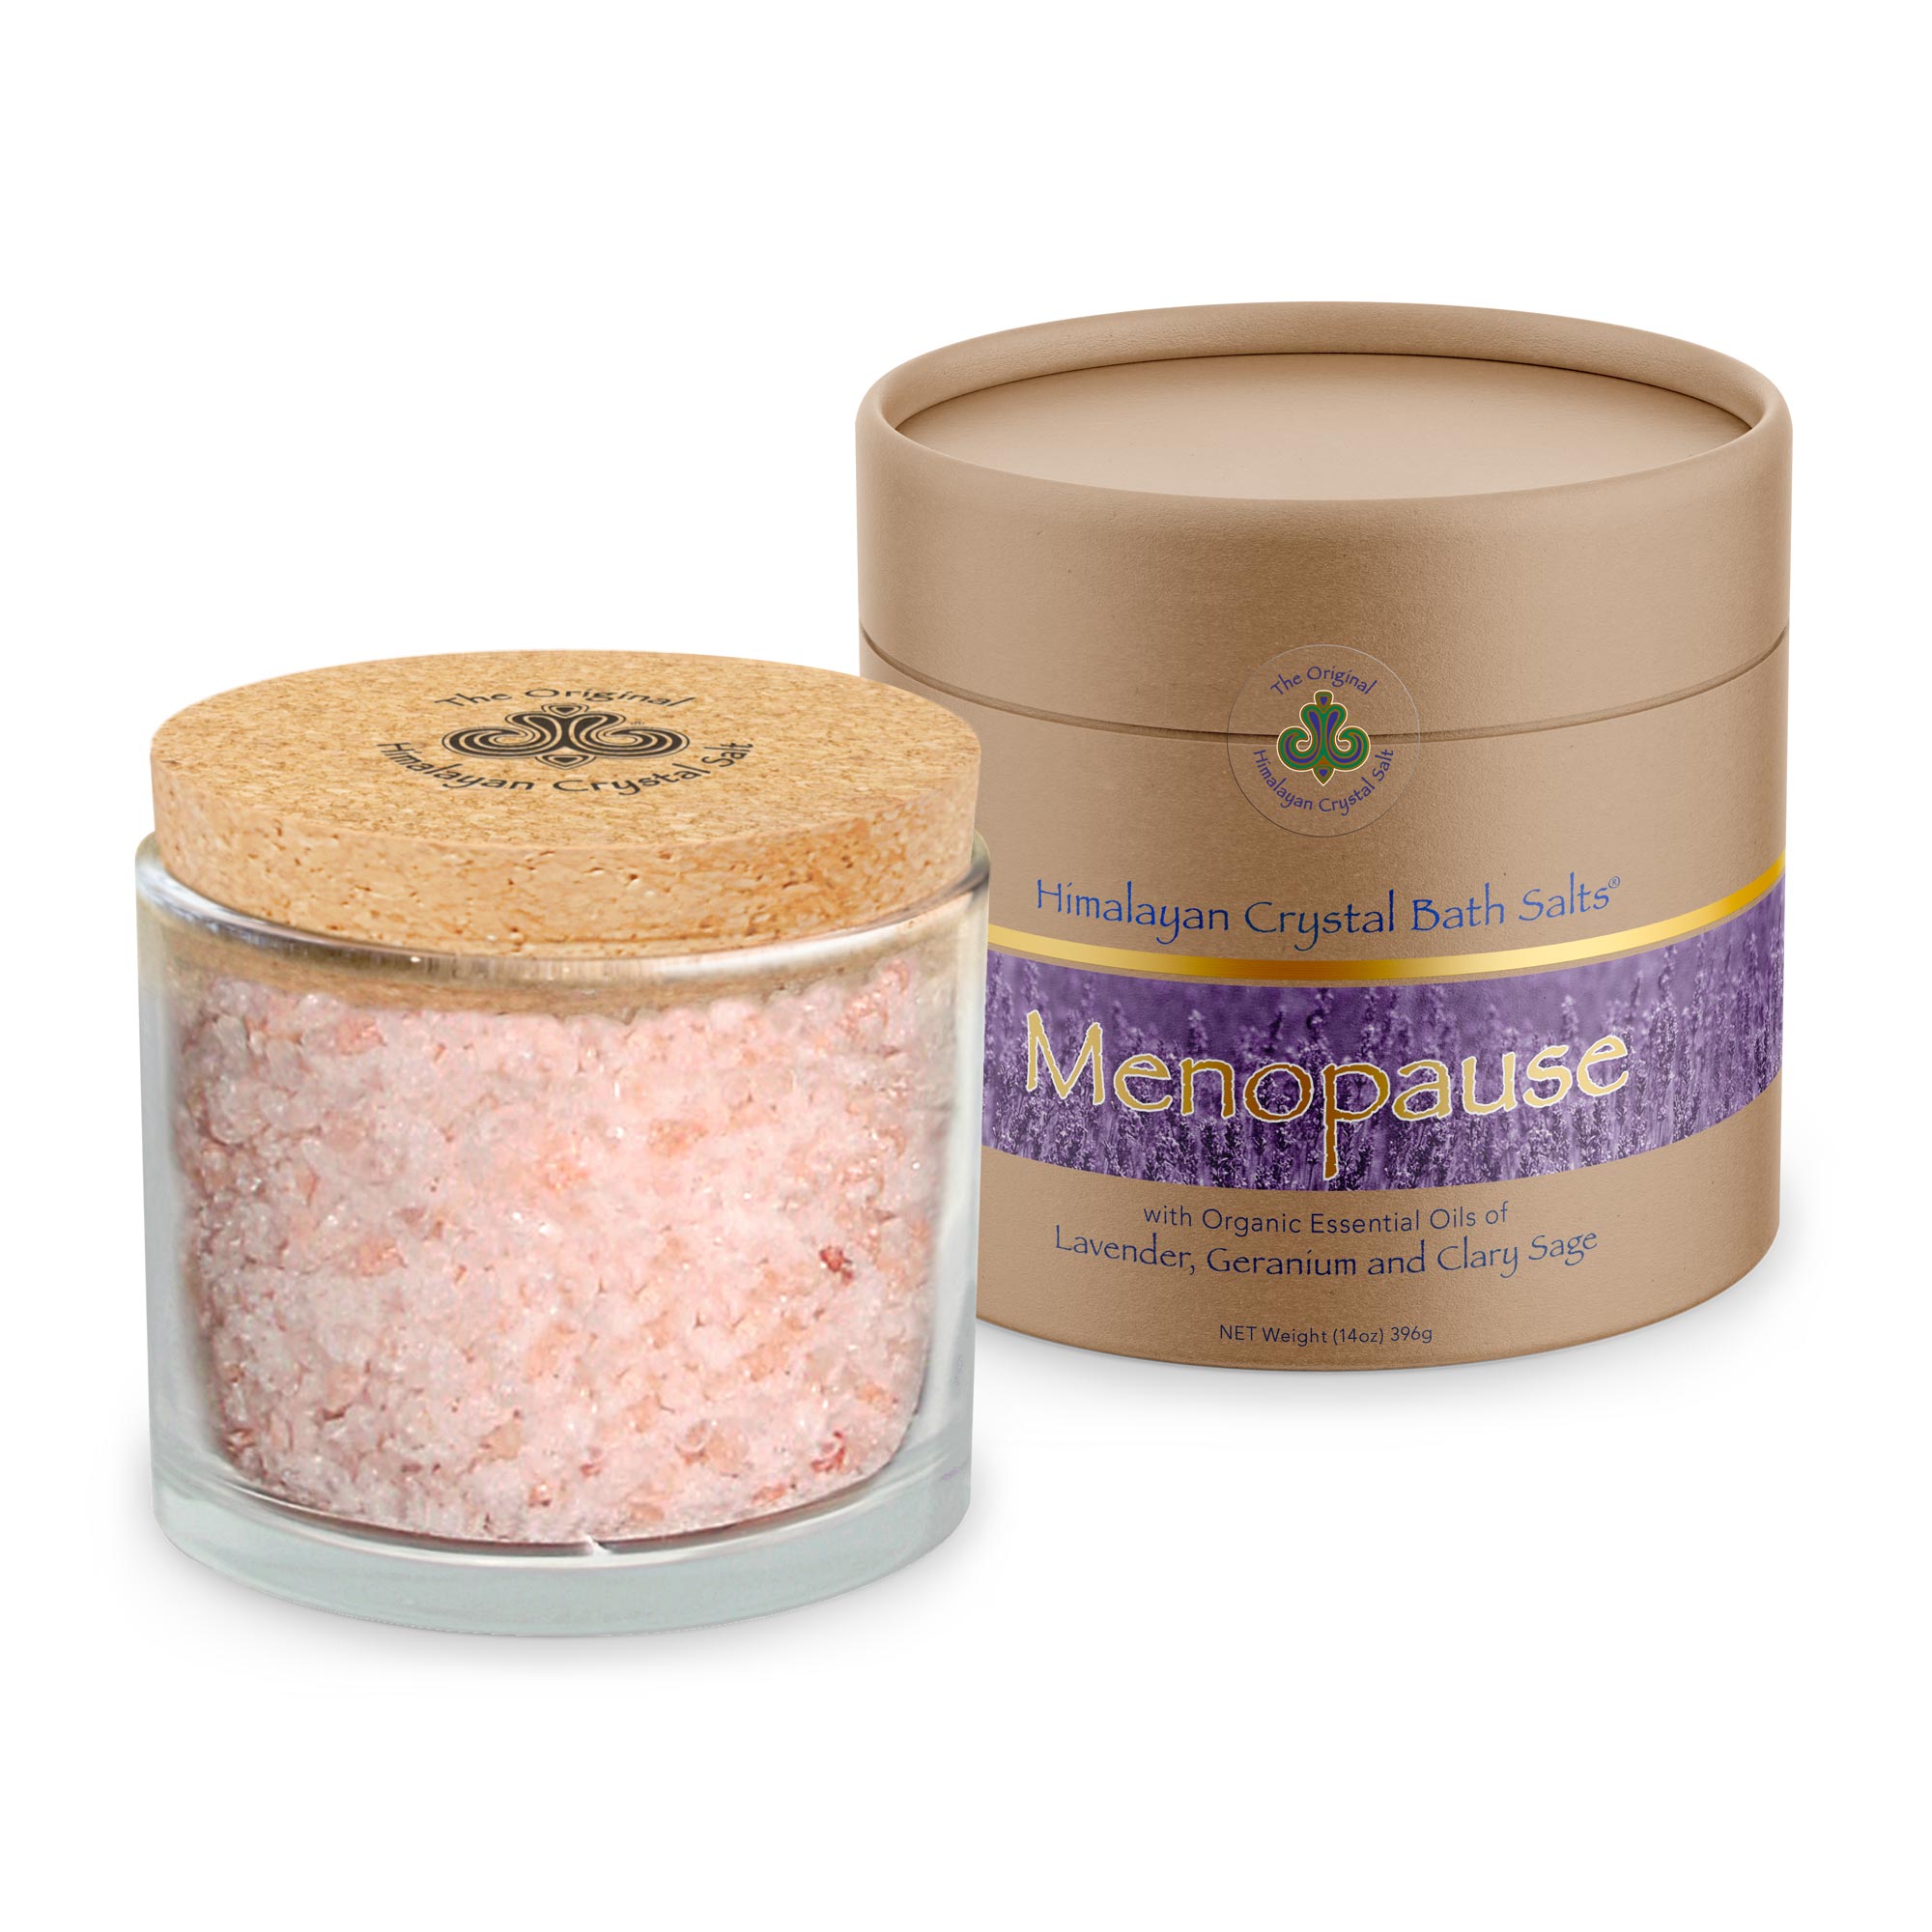 Menopause Bath Salts product glass jar filled with Himalayan Crystal Salt, cork cover and tan product box with bands of gold and lavender flowers both featuring Himalayan Crystal Salt logo, on white background